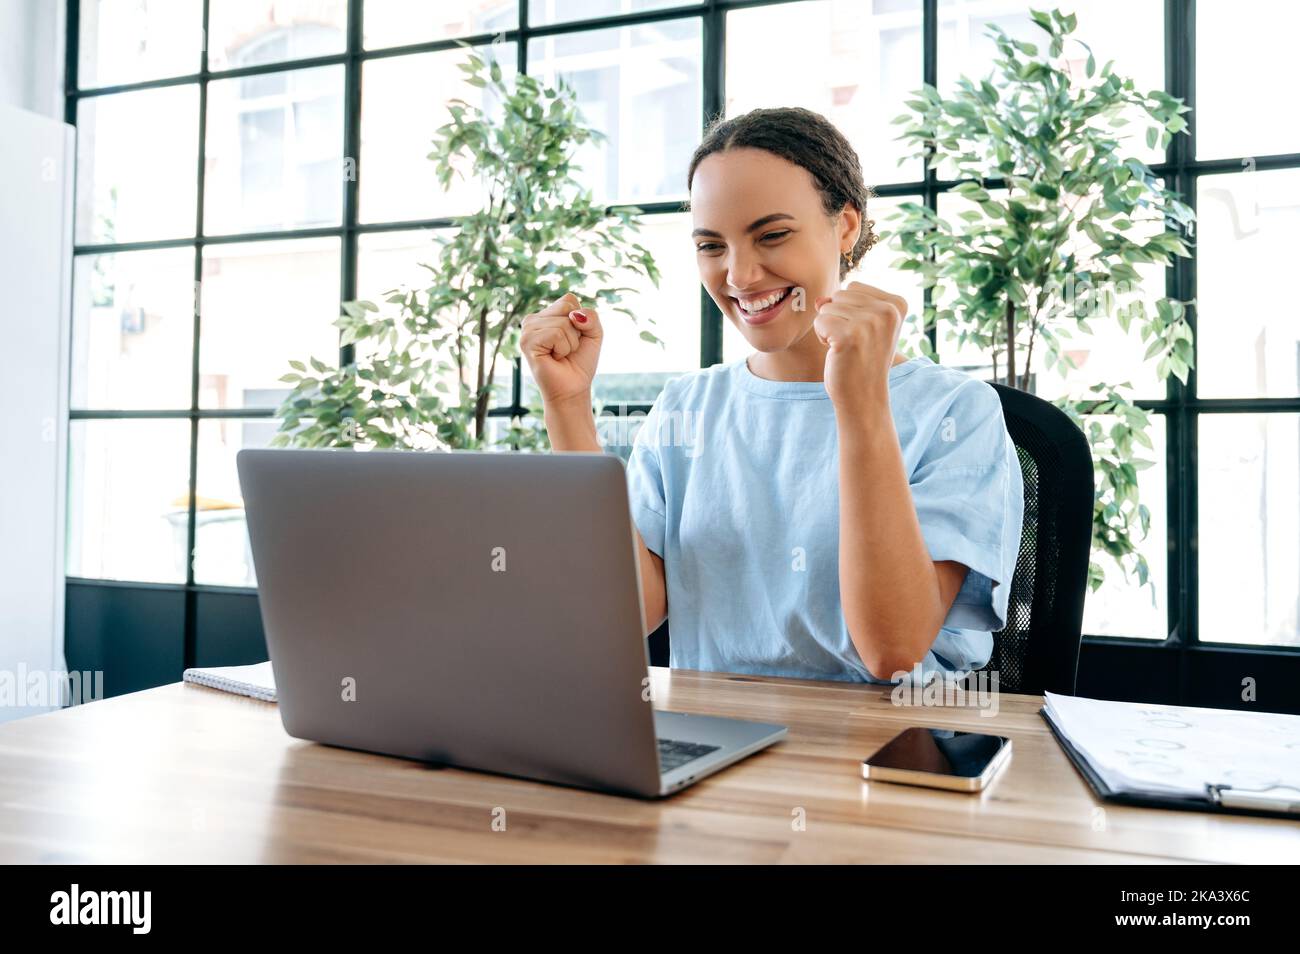 Amazed happy brazilian or hispanic business woman, sit at a desk with laptop in modern office, rejoicing in success, big profit, celebrate deal, job promotion, gesturing fists, looks at camera, smiles Stock Photo